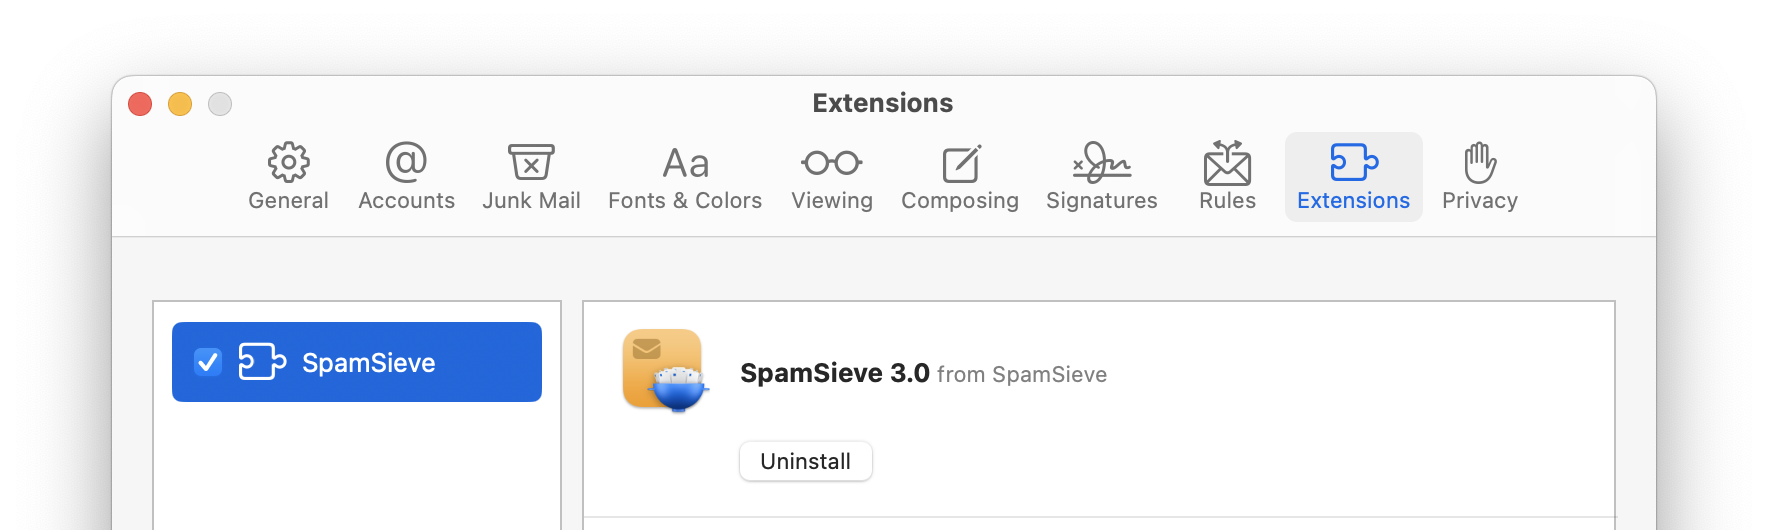 apple mail extensions